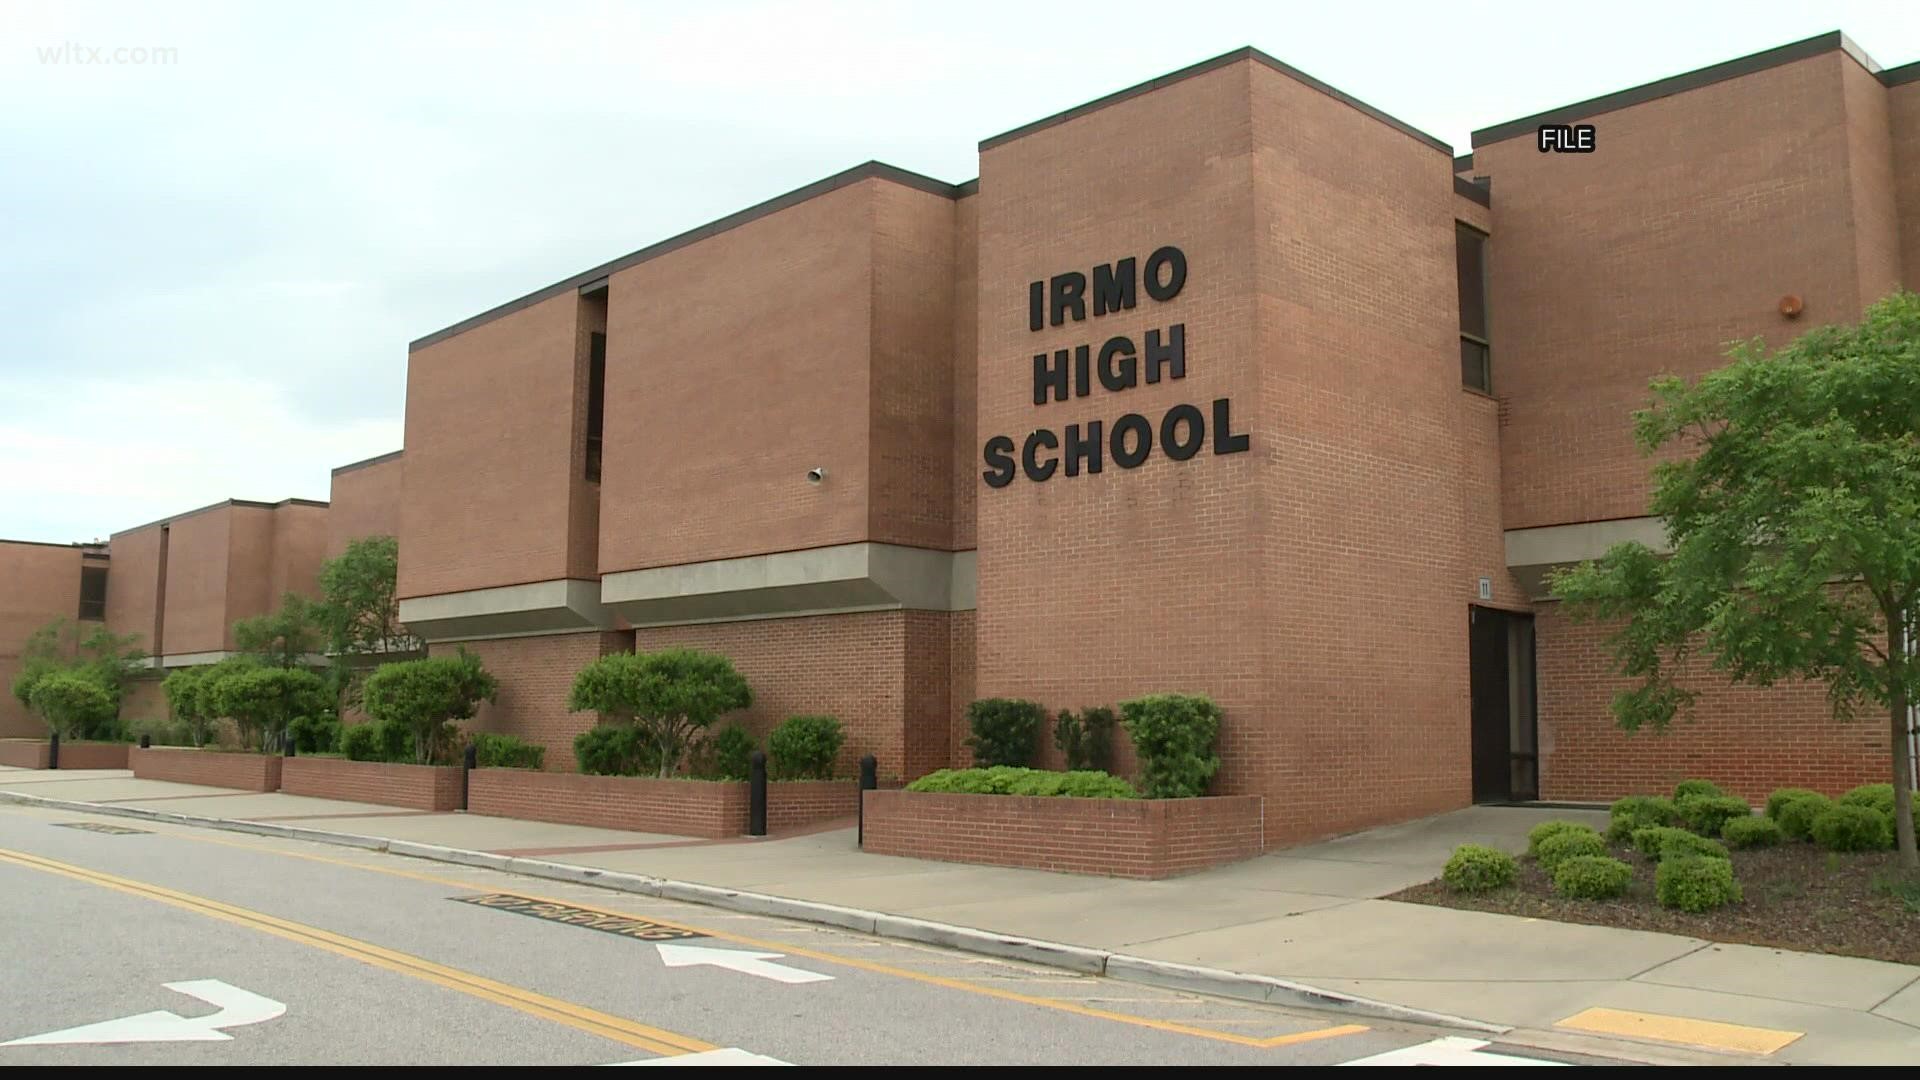 Students returning to Irmo High School on Wednesday will find some security changes in place.